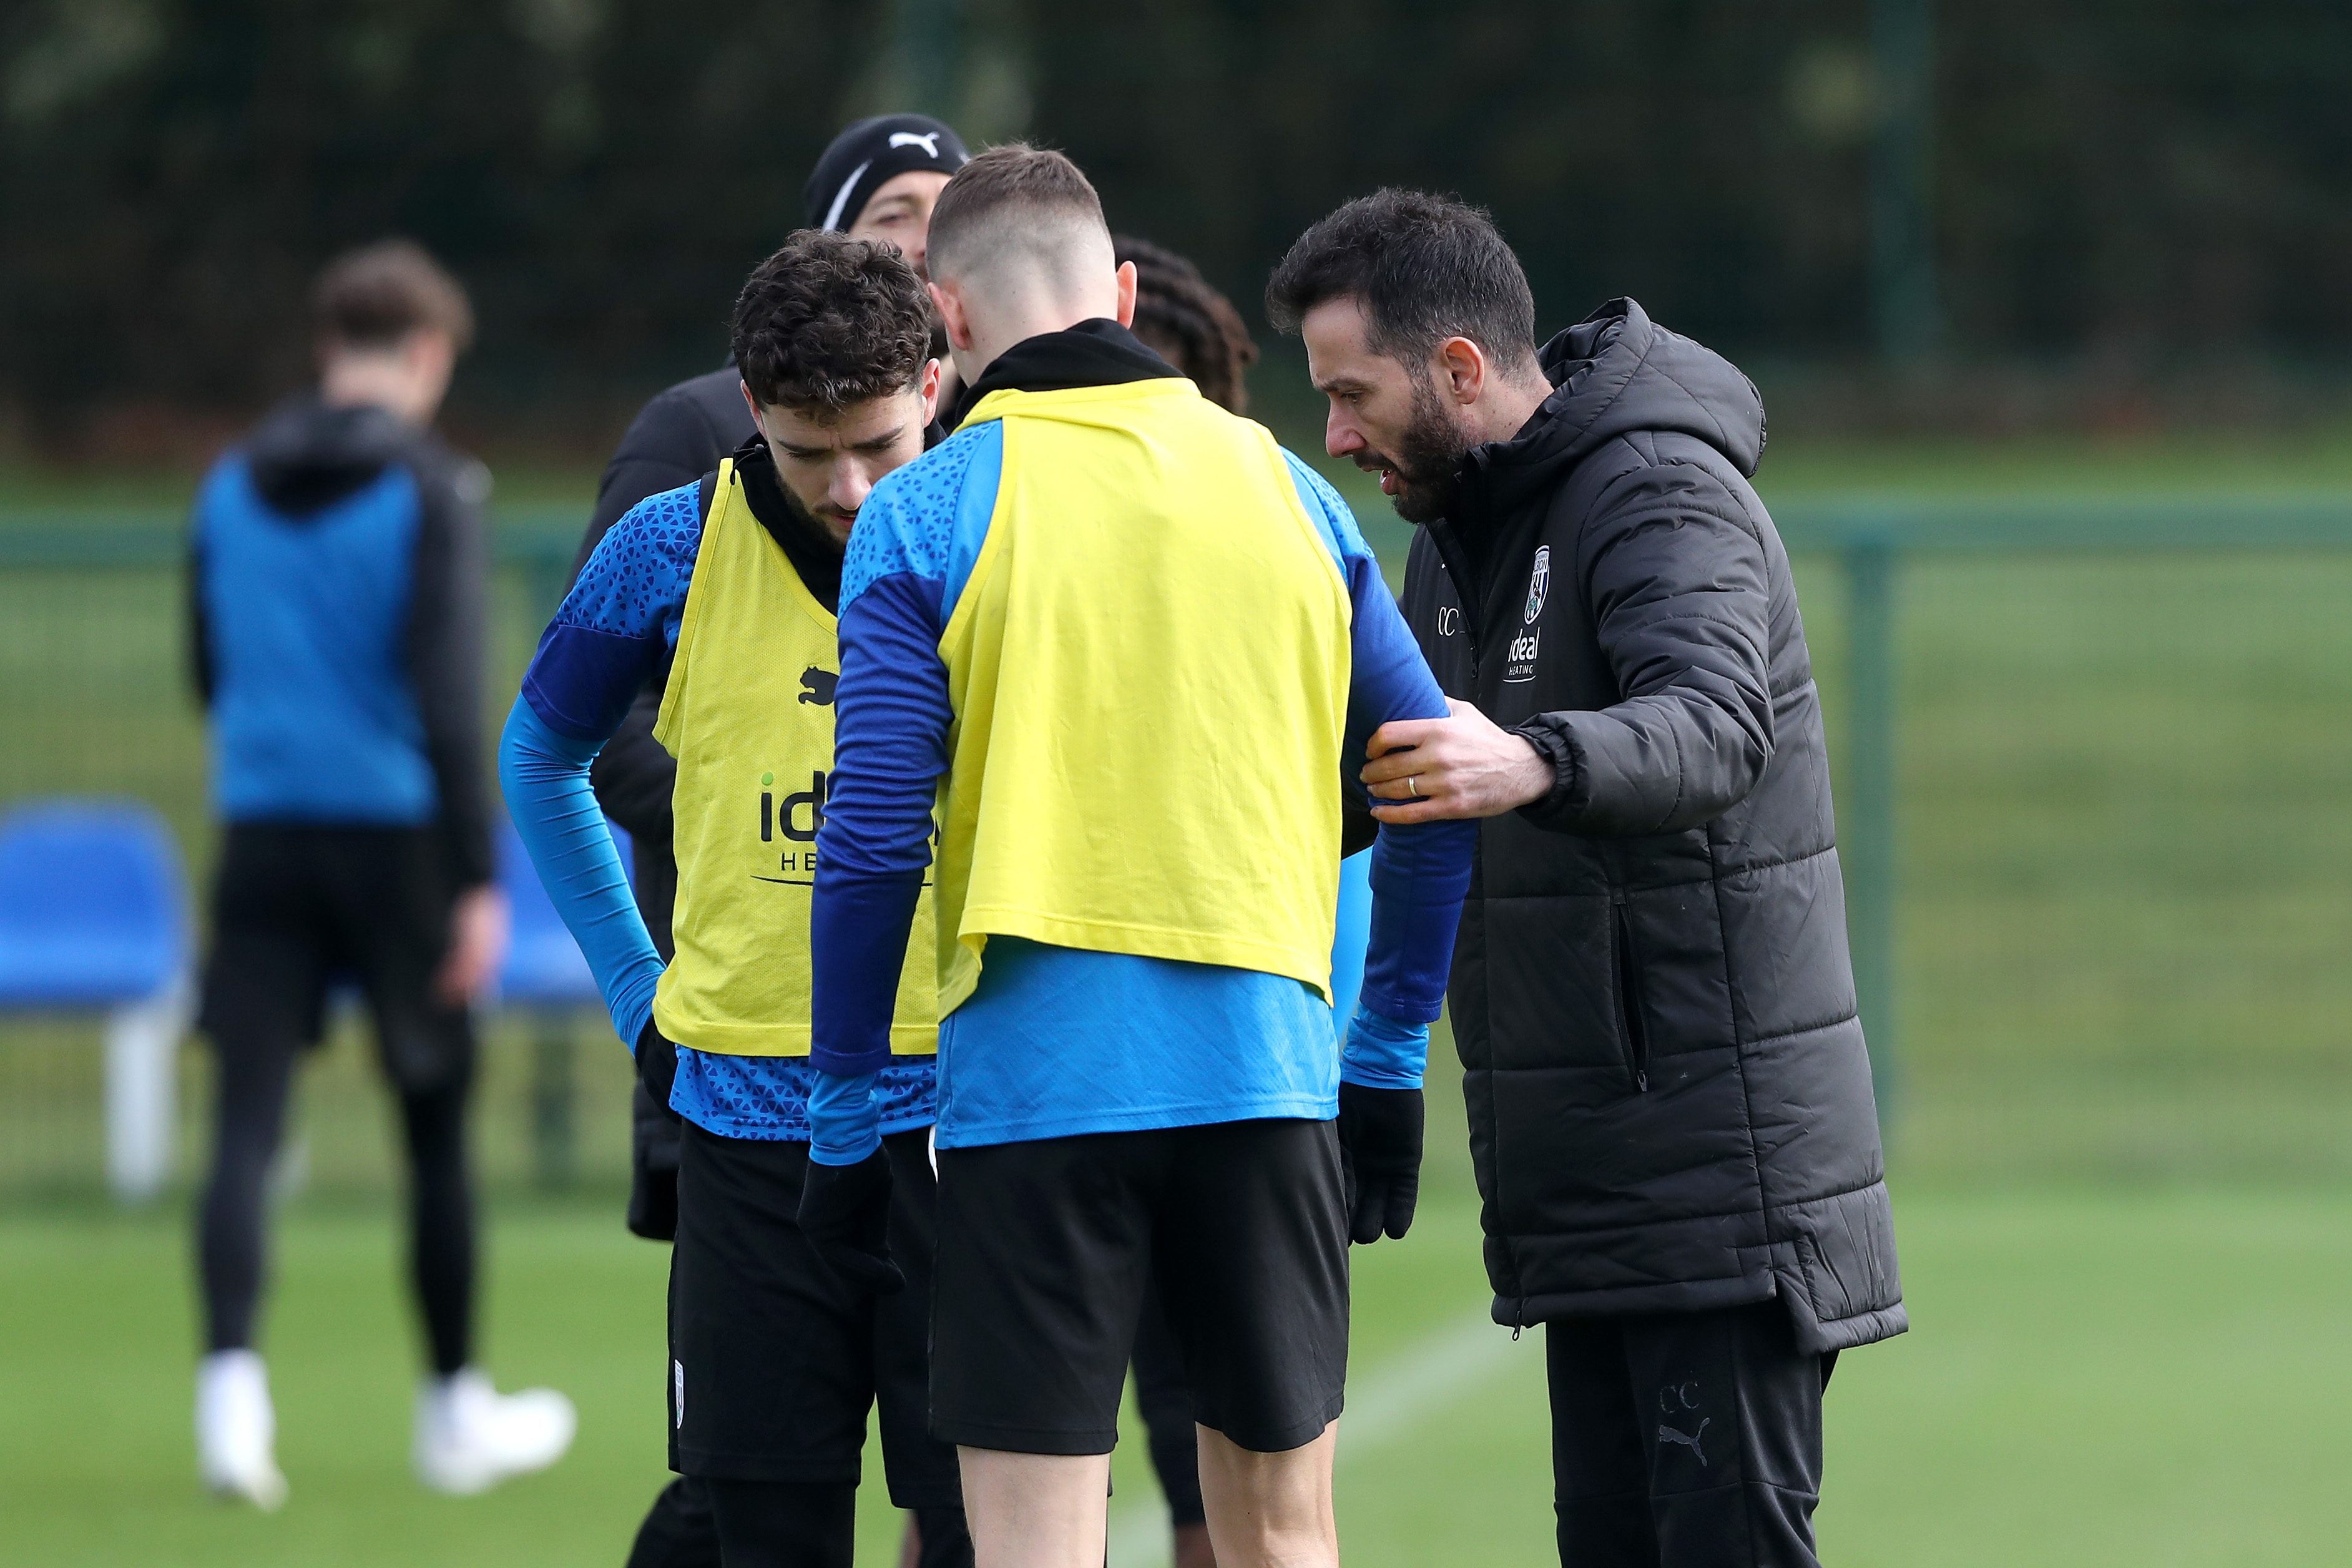 Carlos Corberán talking to Conor Townsend and Mikey Johnston during a training session